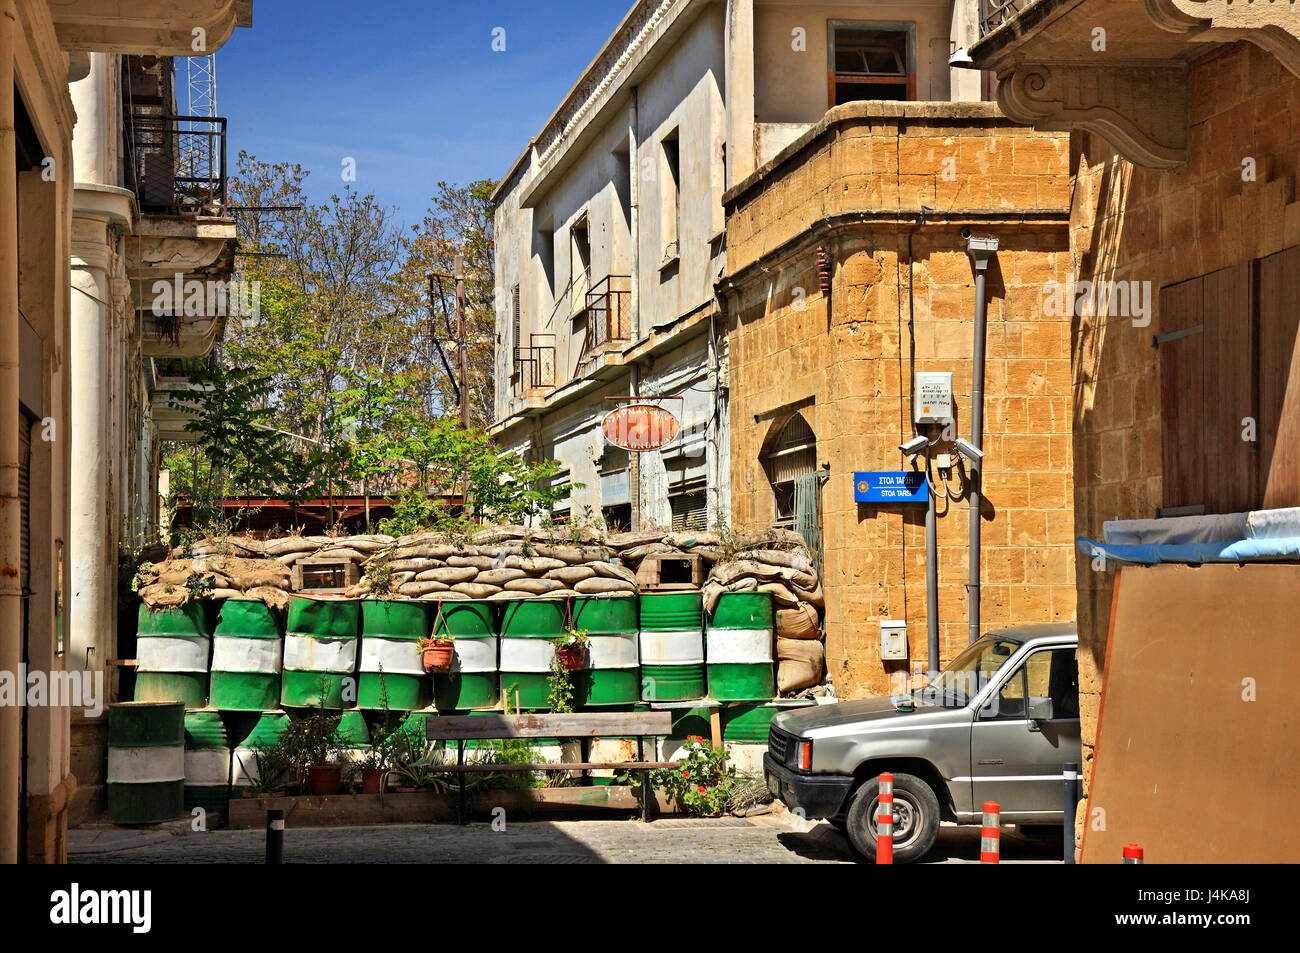 Part of the "Green Line" ("Buffer zone" or "Dead Zone") in the old town of Lefkosia (Nicosia), the last divided capital in the world. Cyprus Stock Photo